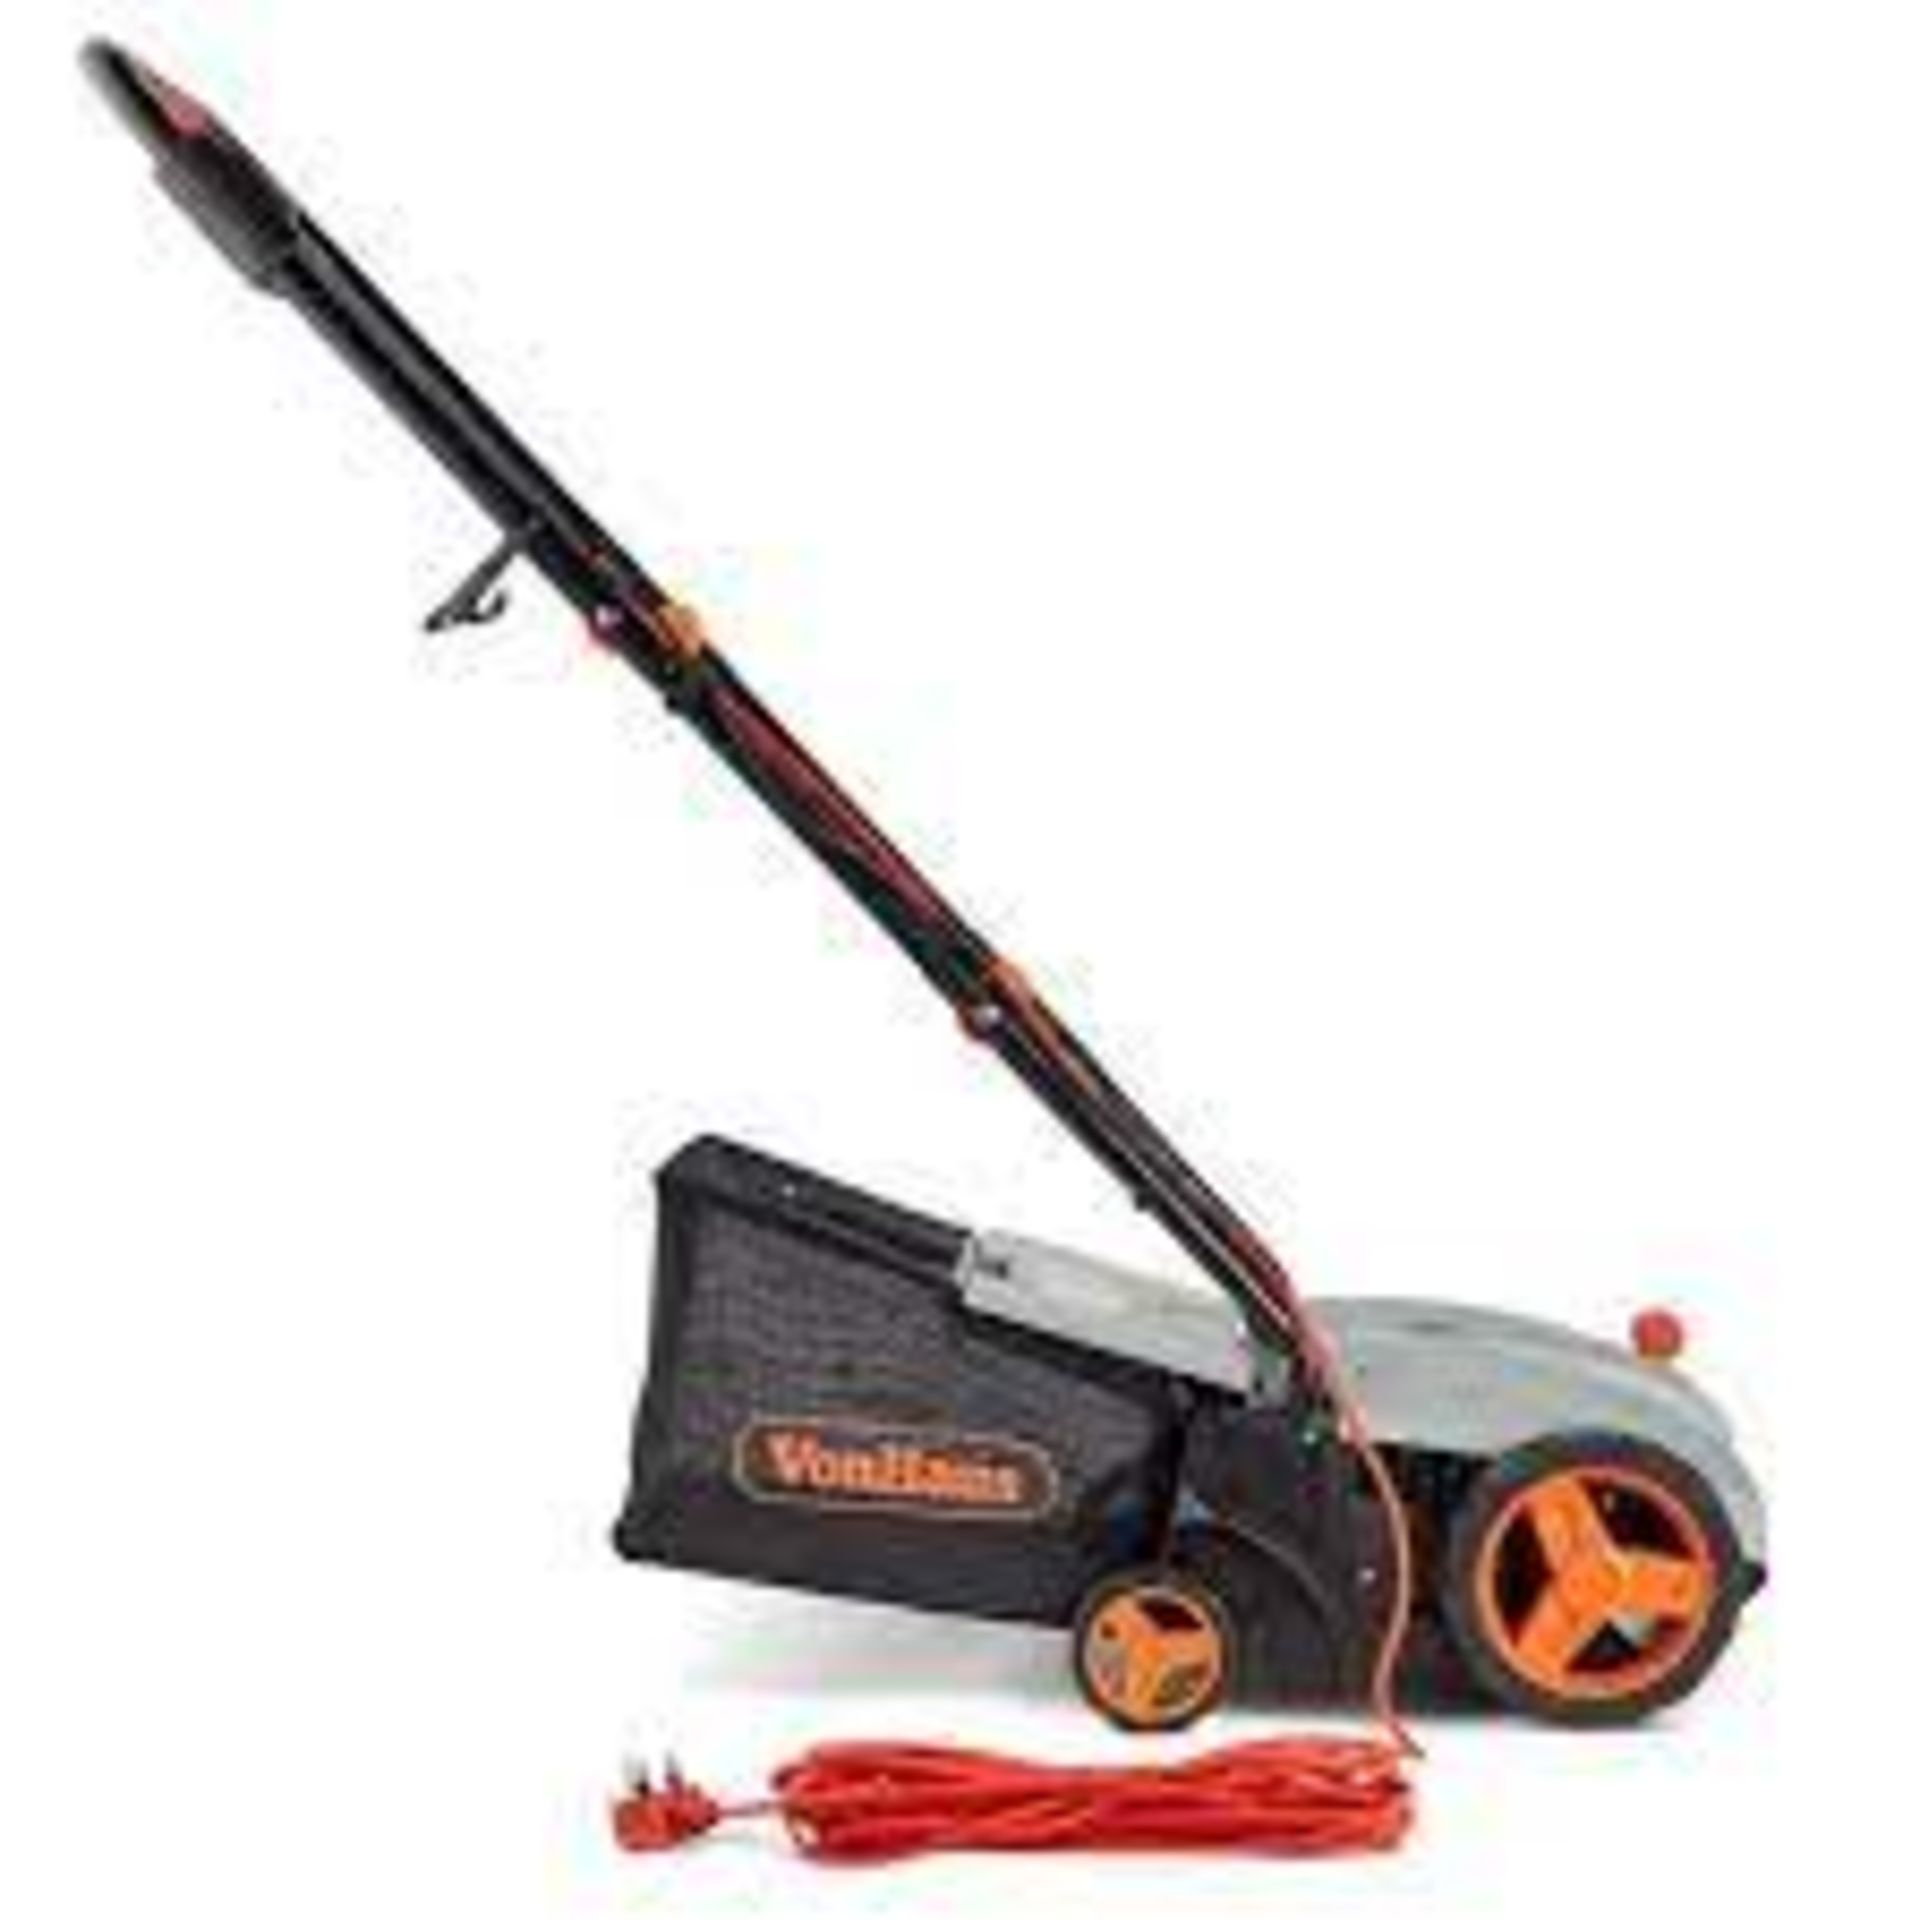 BRAND NEW 1300W LAWN MOSS RAKE This 1300W electric rake is the easy way to clear your lawn of